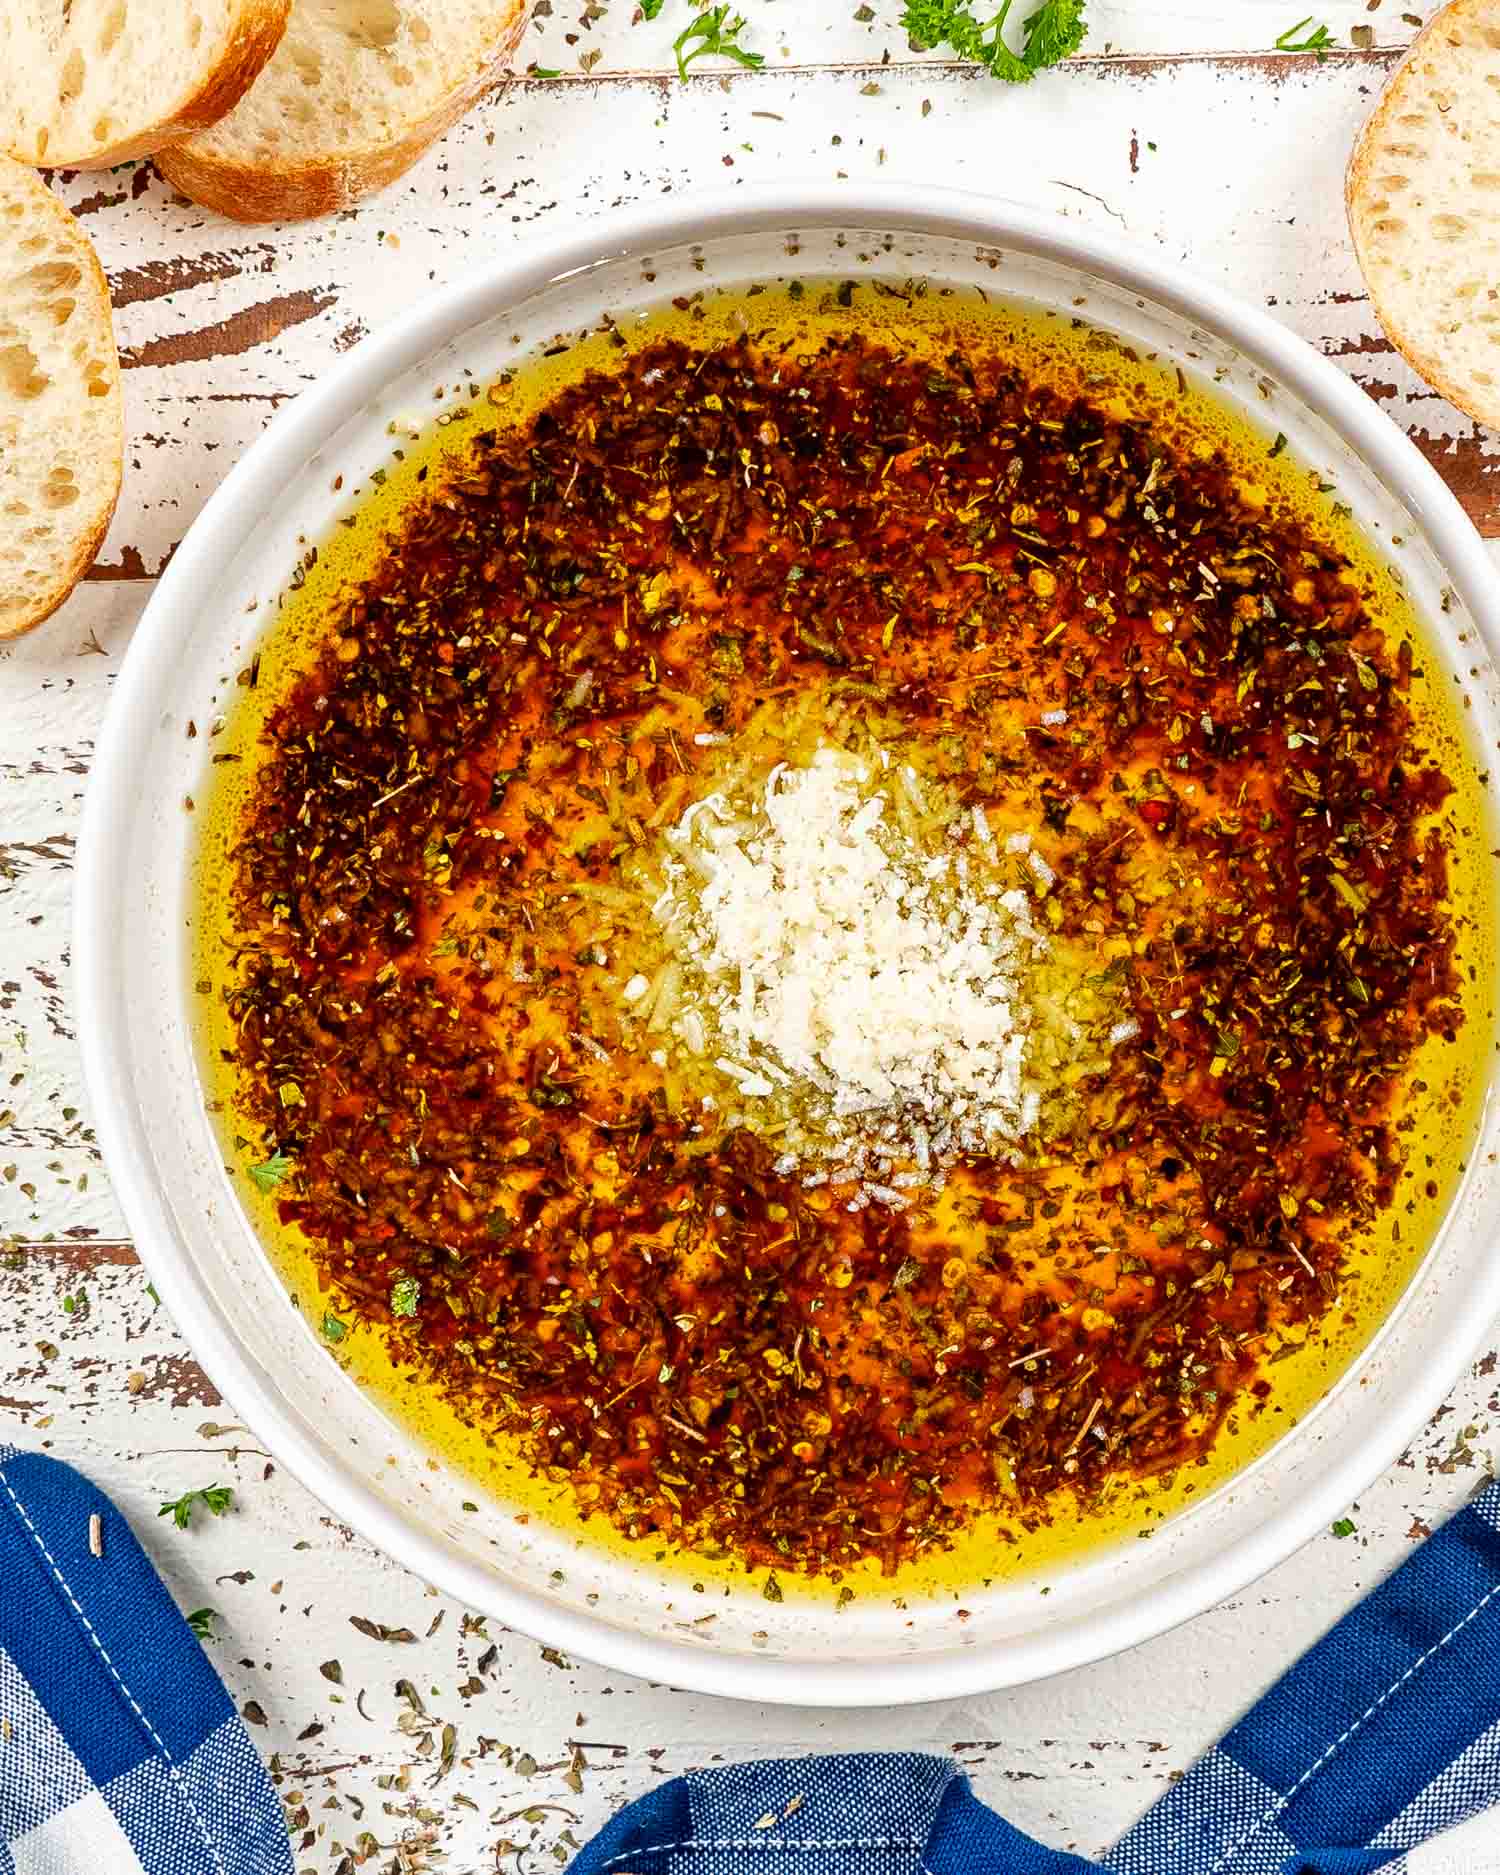 Easy Bread Dipping Oil with Spices - DeLallo